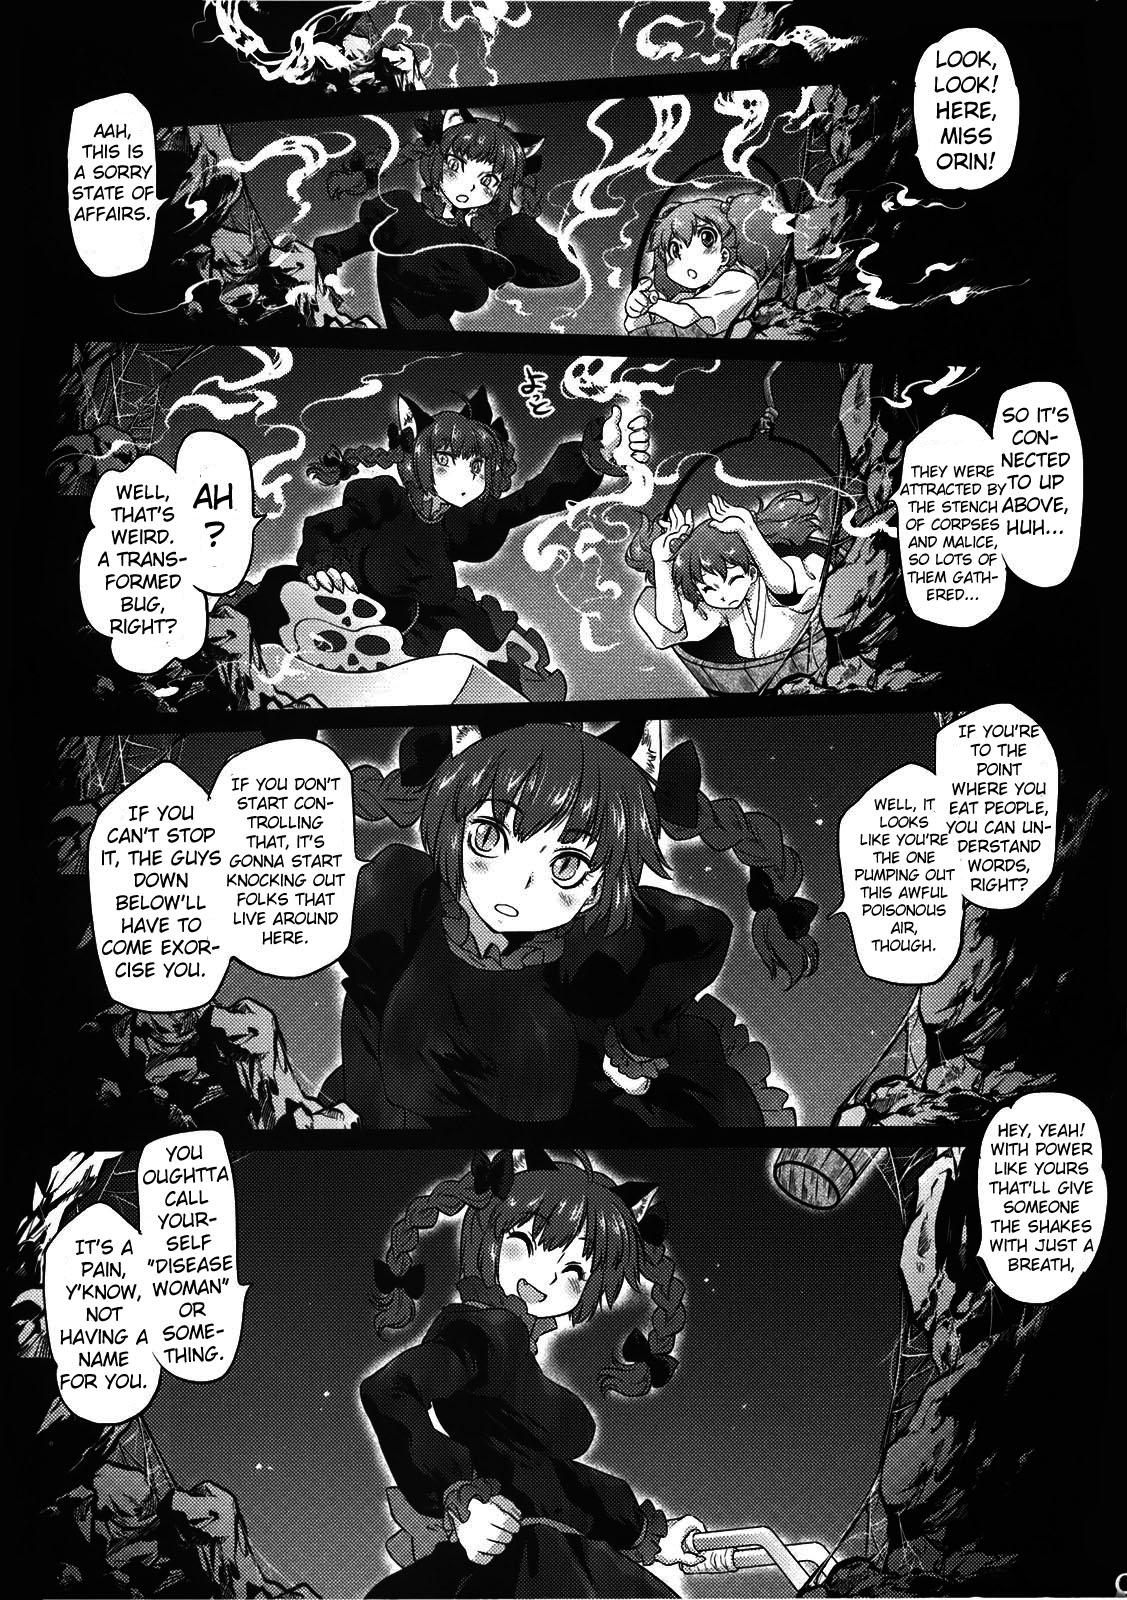 Whipping A Disease Woman's Story - Touhou project Gay Medical - Page 9